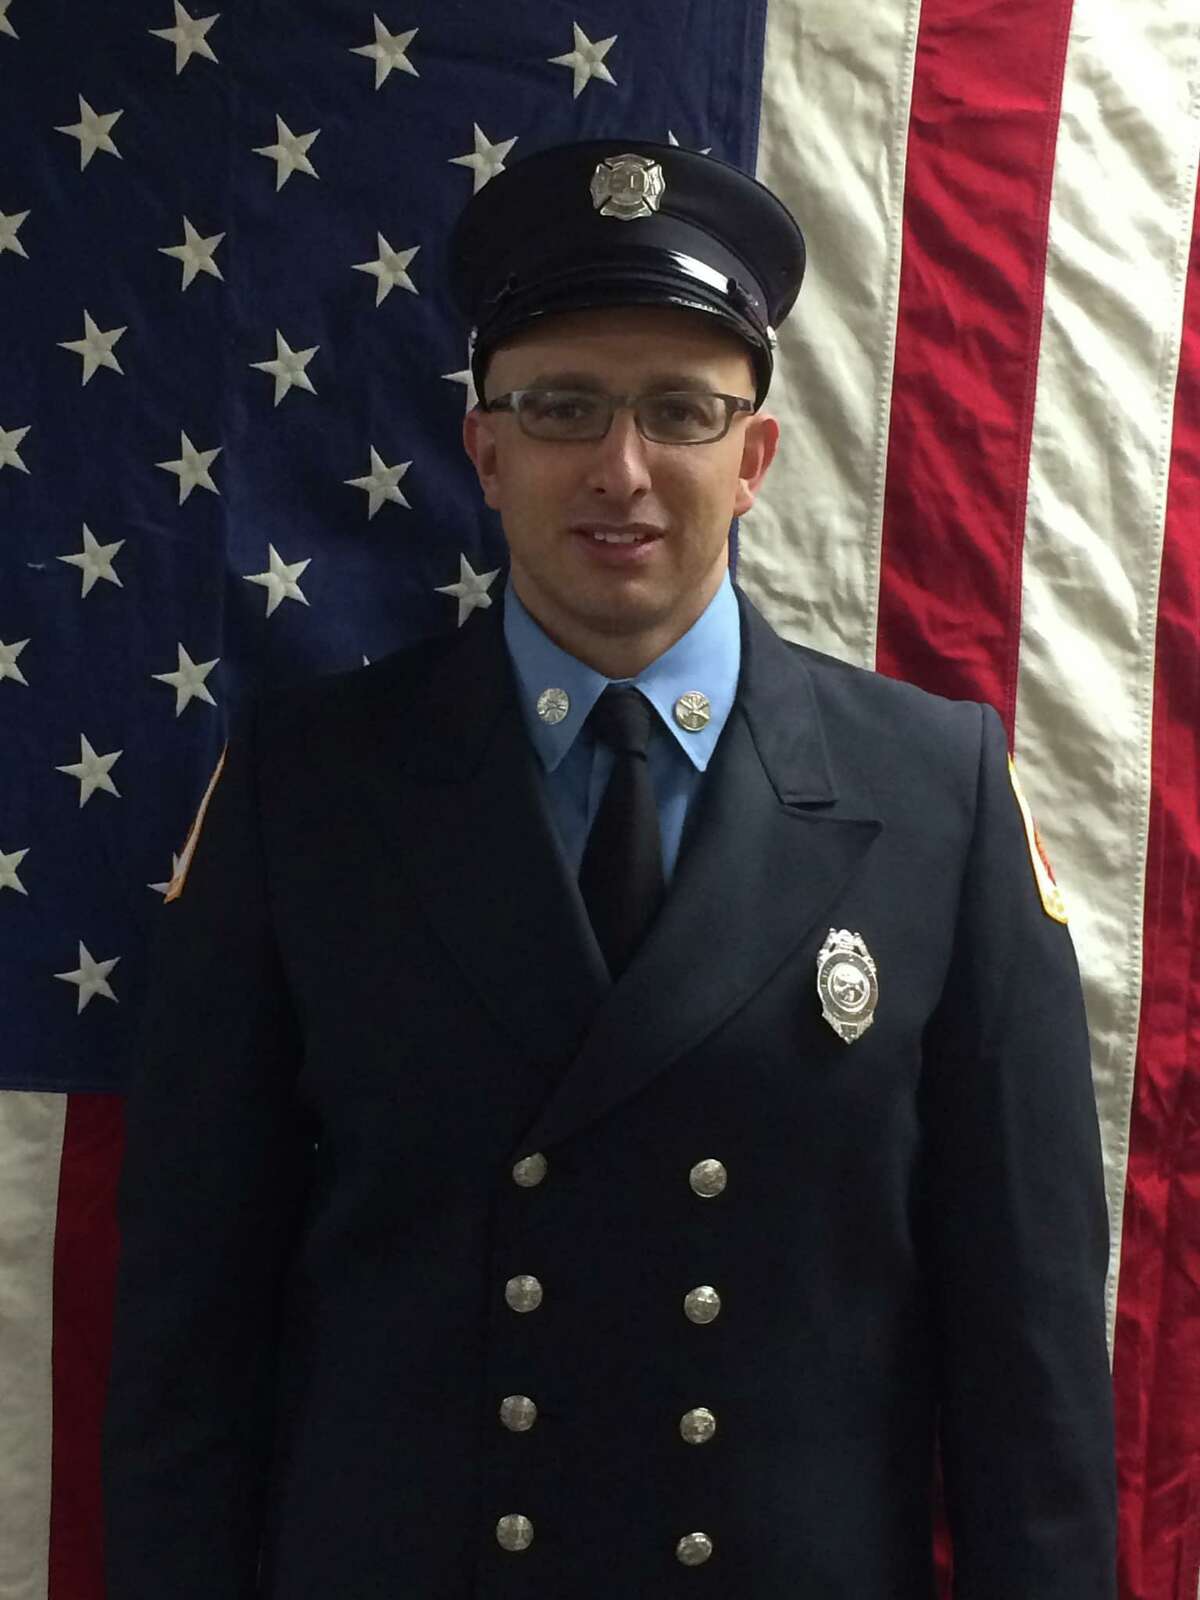 New Fire Captain Michael Blatchley was sworn in on Monday. Blatchley reminisced about following a budding passion to serve in the firehouse instead of his childhood dream of becoming a police officer.